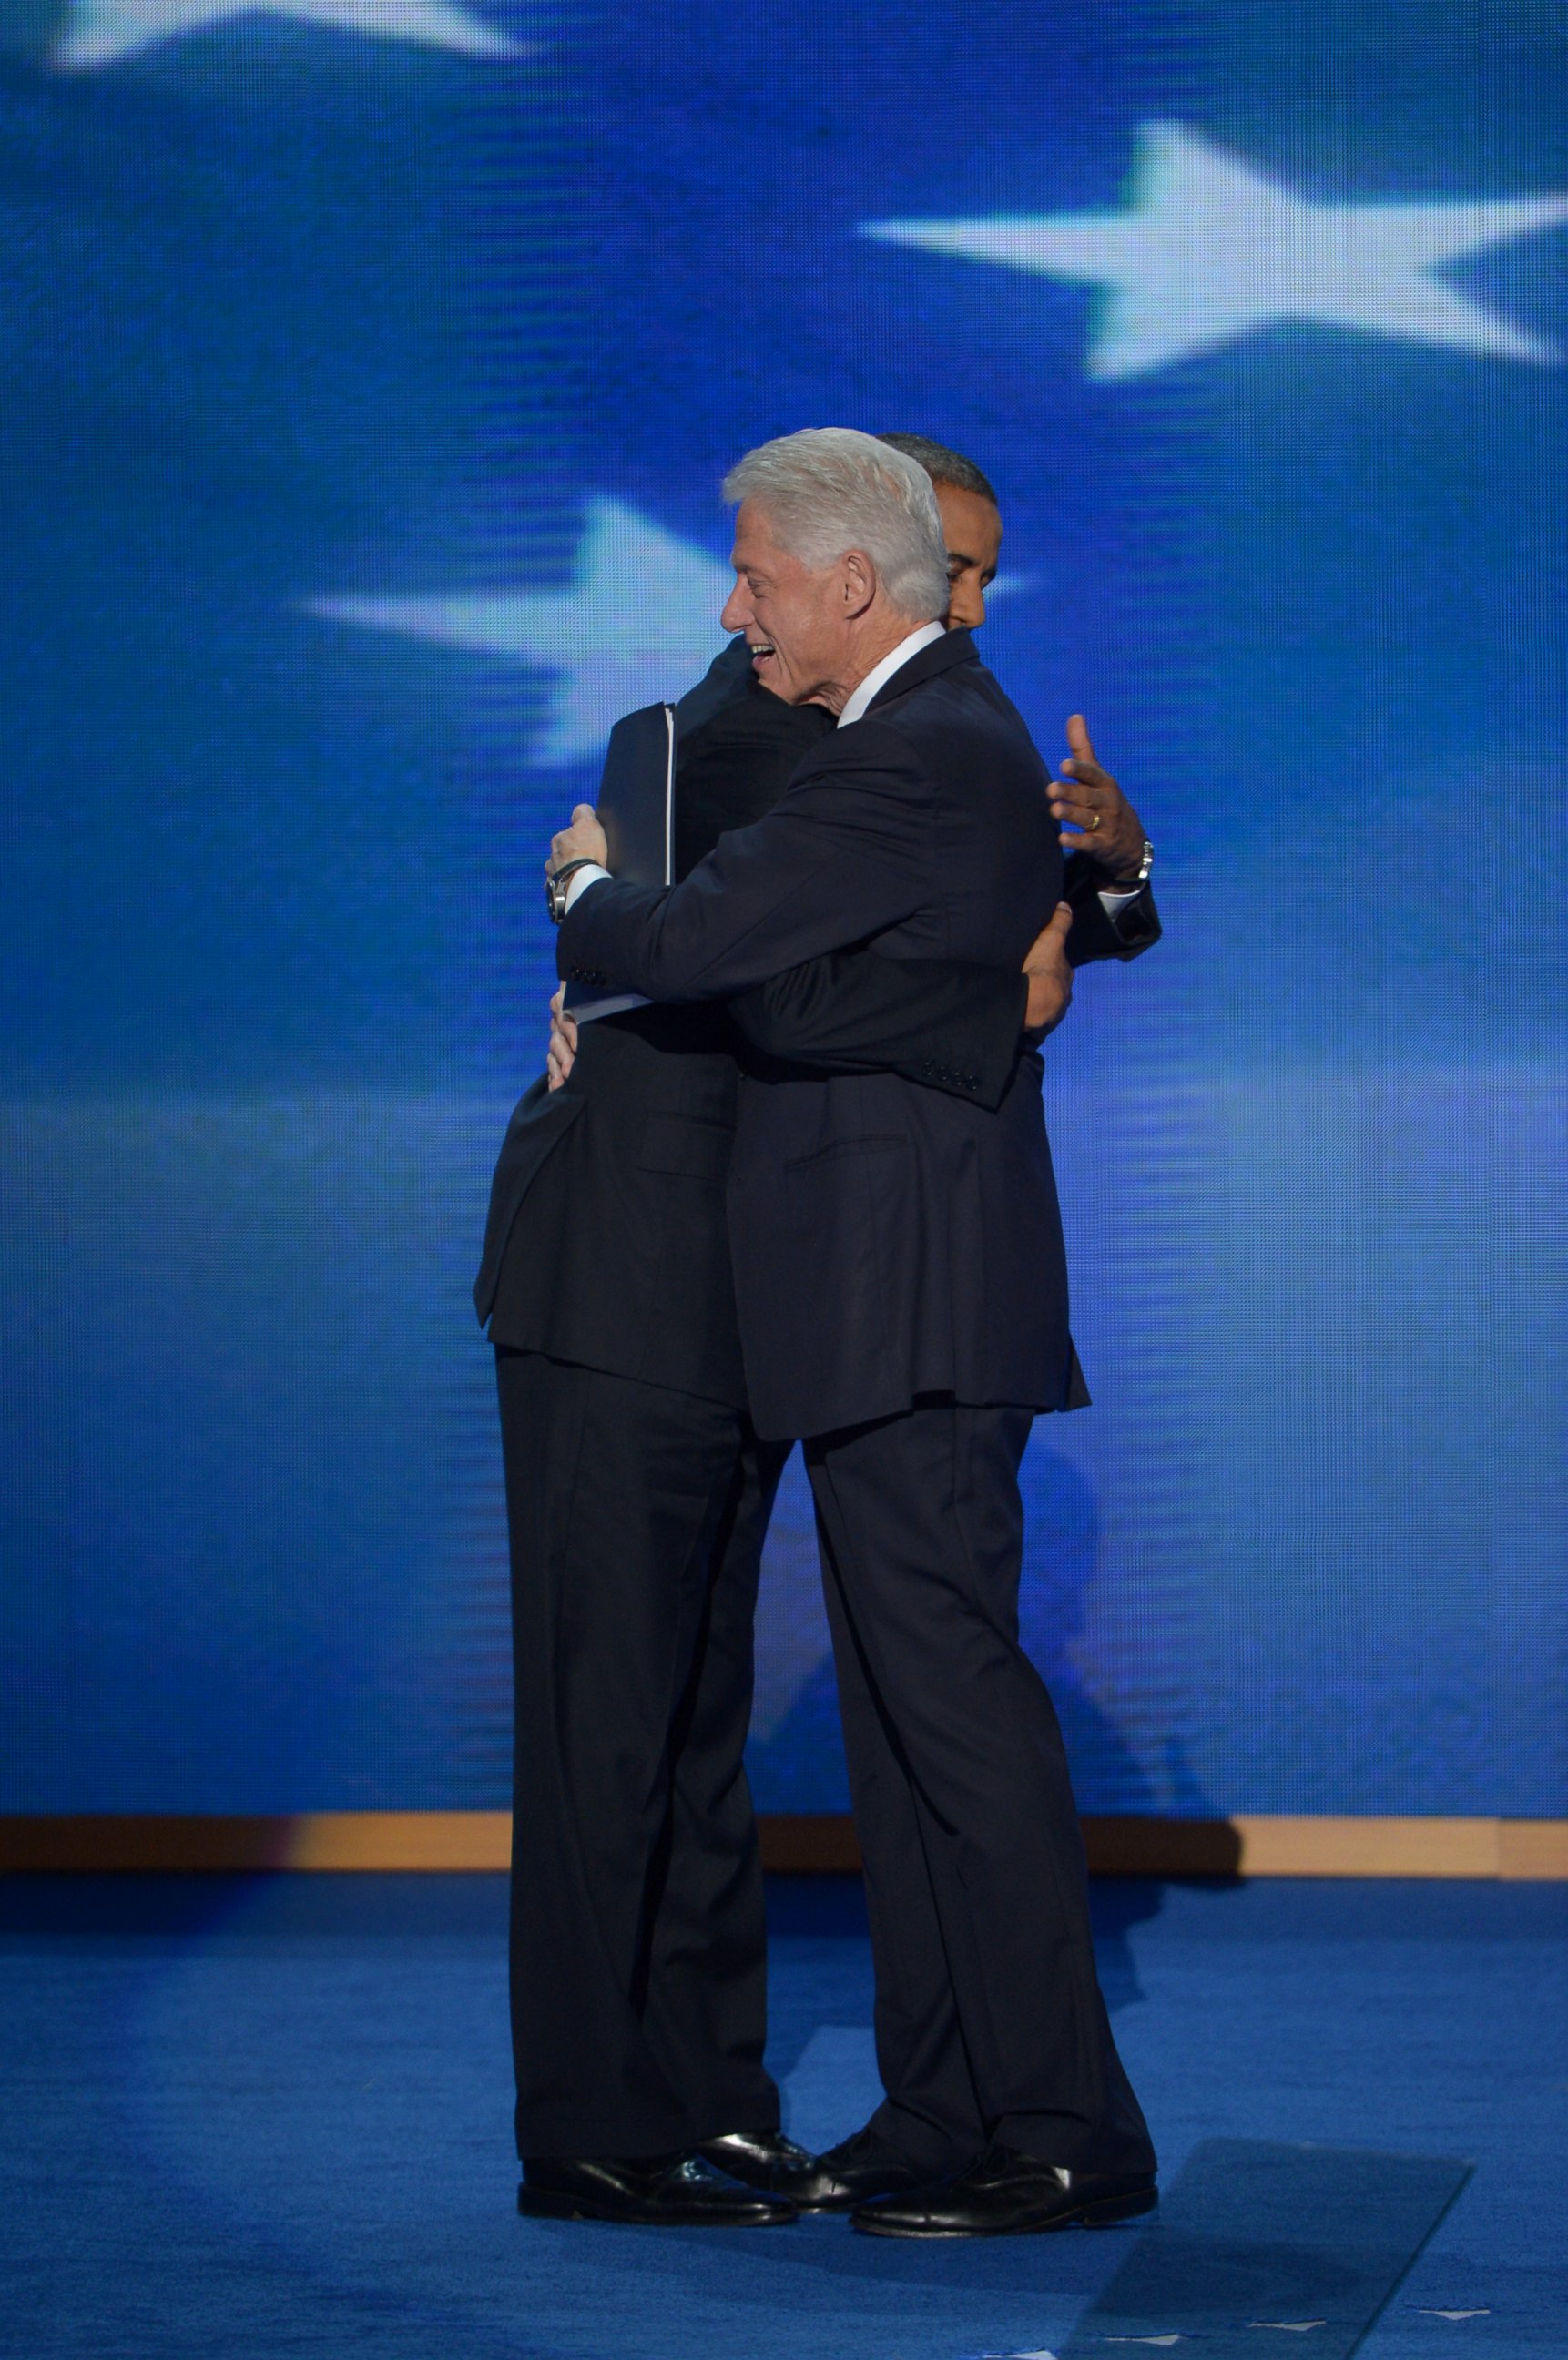 PHOTO: Bill Clinton hugs Pres. Barack Obama after he addressed the 2012 Democratic National Convention at the Time Warner Center, Sept. 5, 2012 in Charlotte, N.C. 